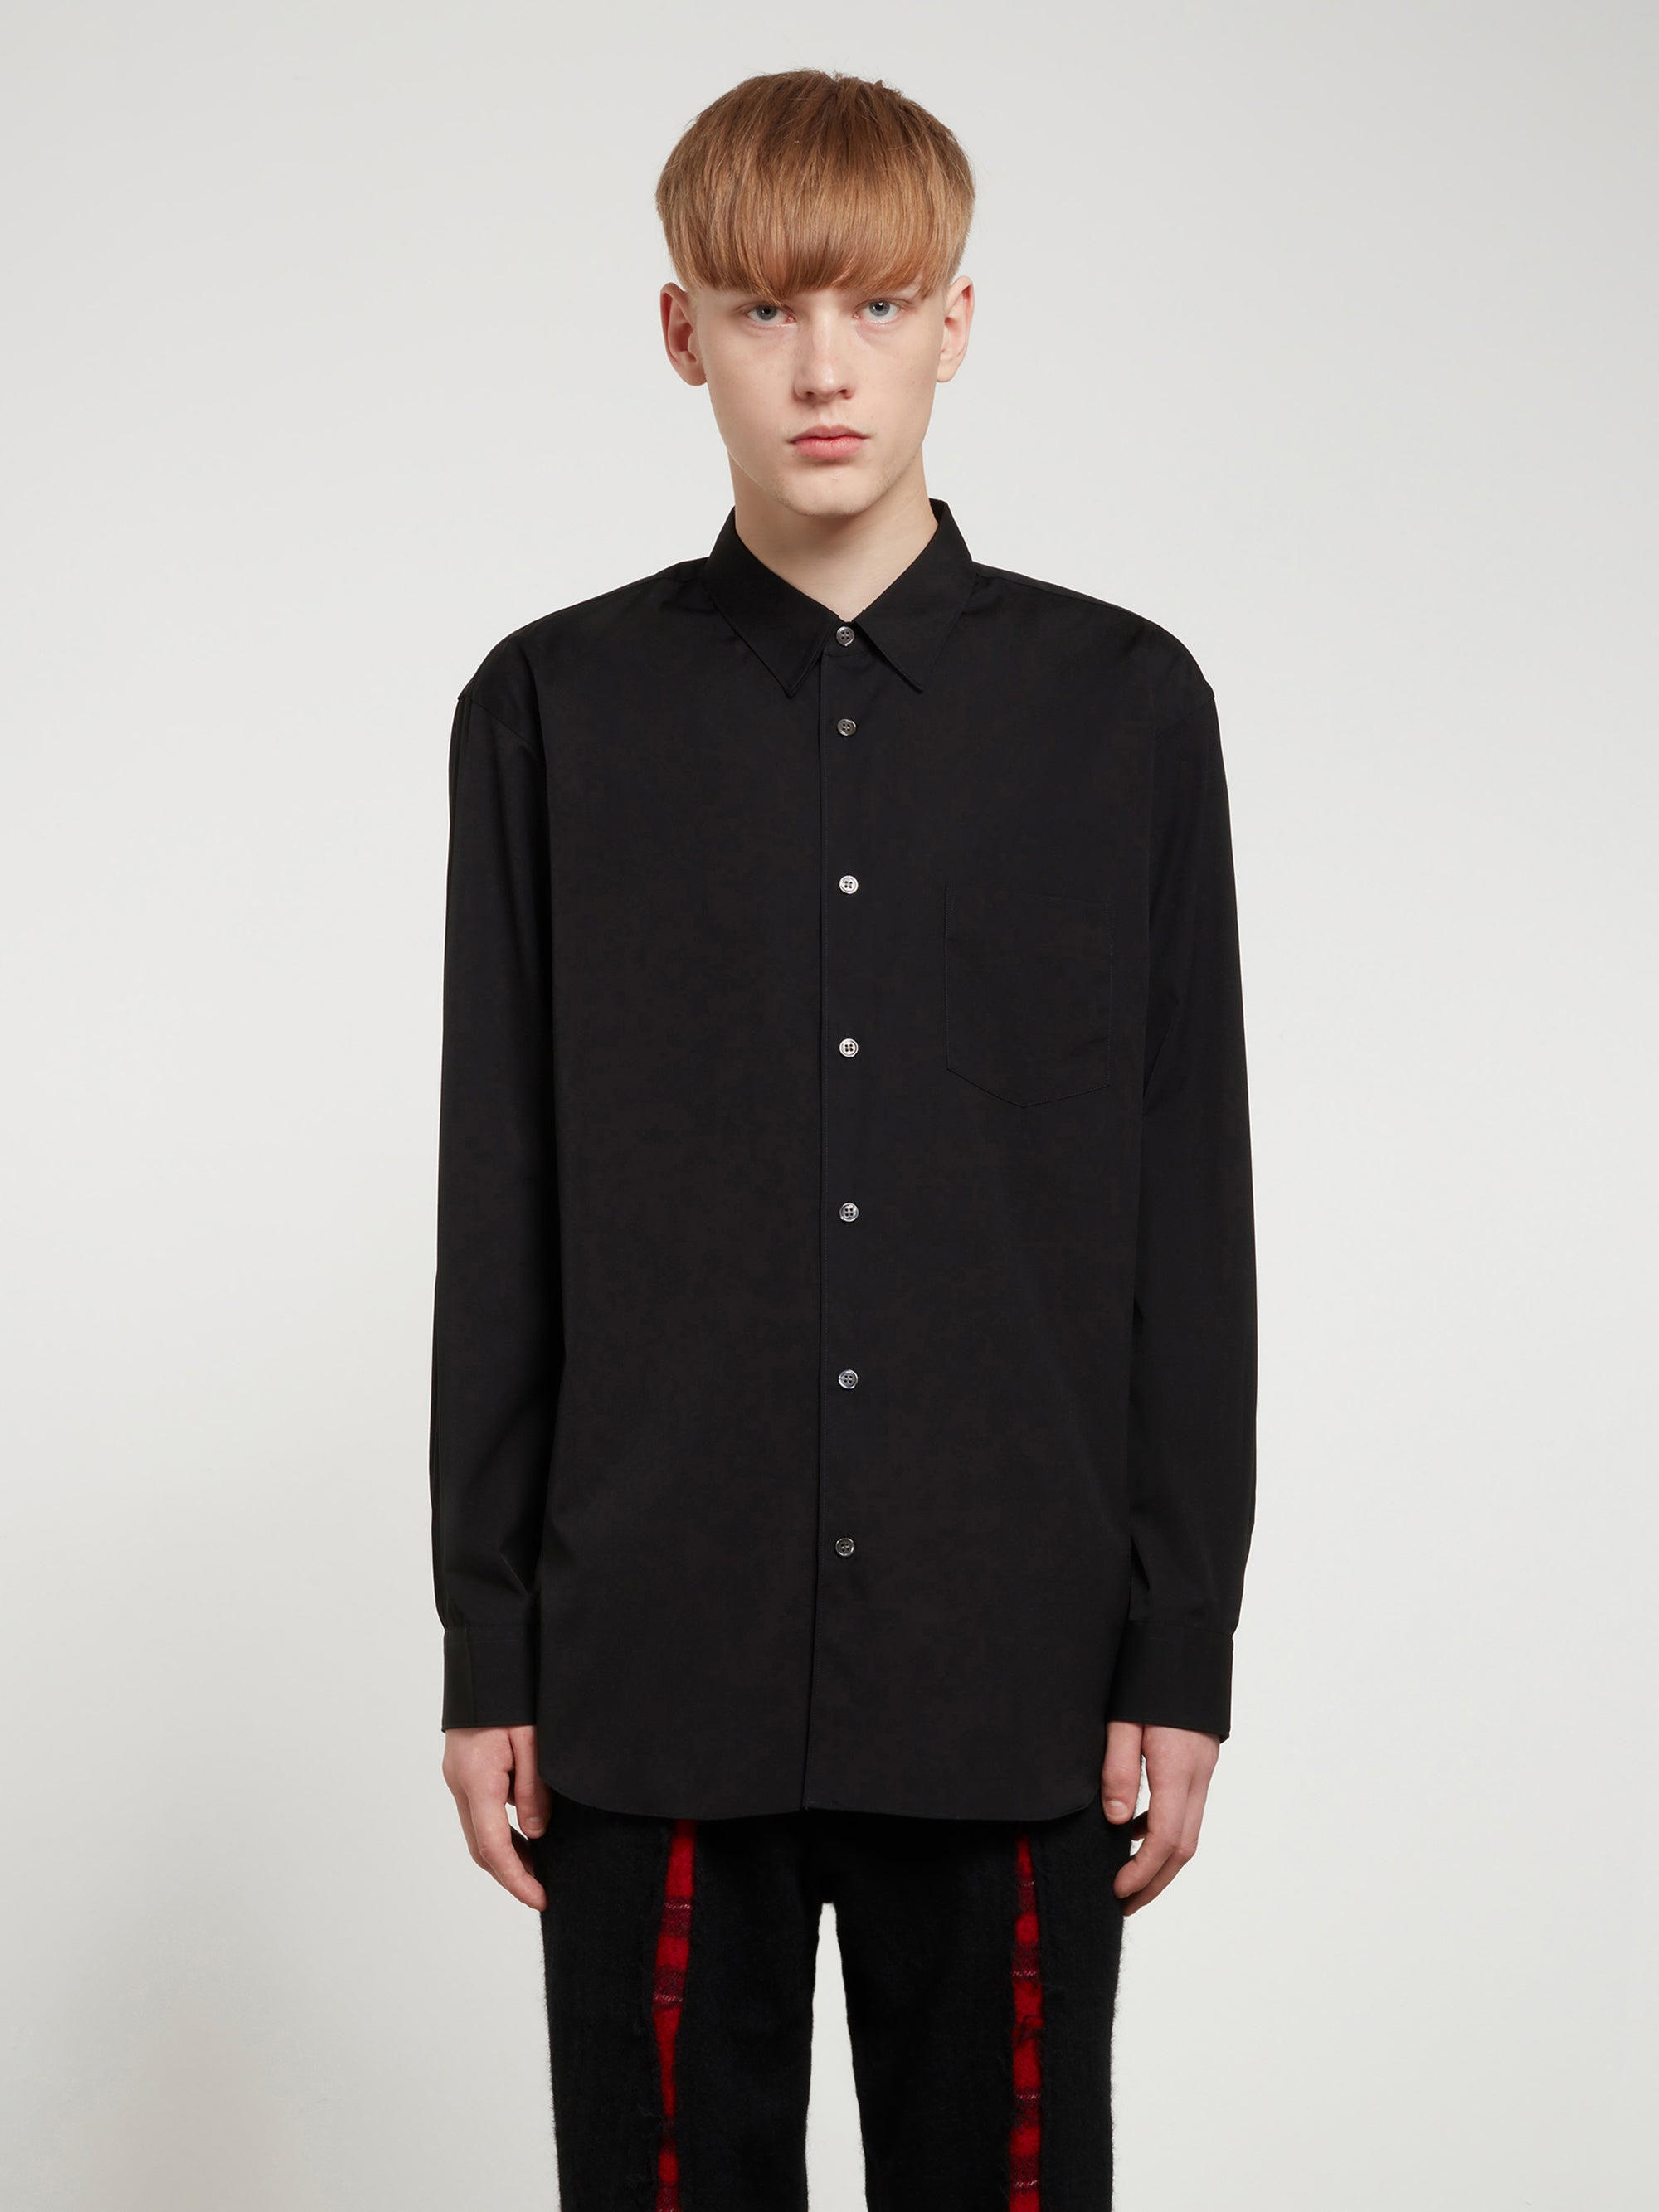 CDG Shirt Forever - Classic Fit Woven Cotton Shirt - (Black) view 2